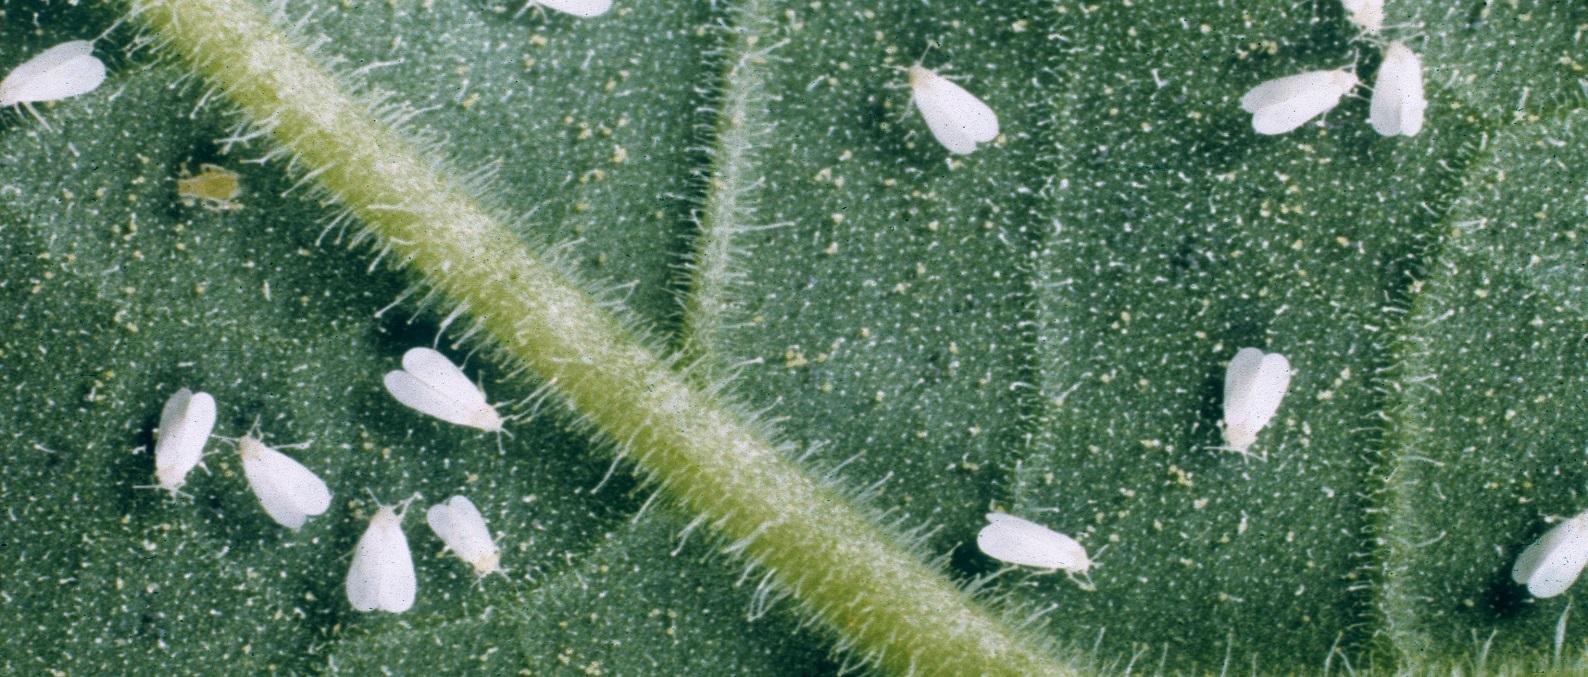 whiteflies congregated on the back of a leaf 